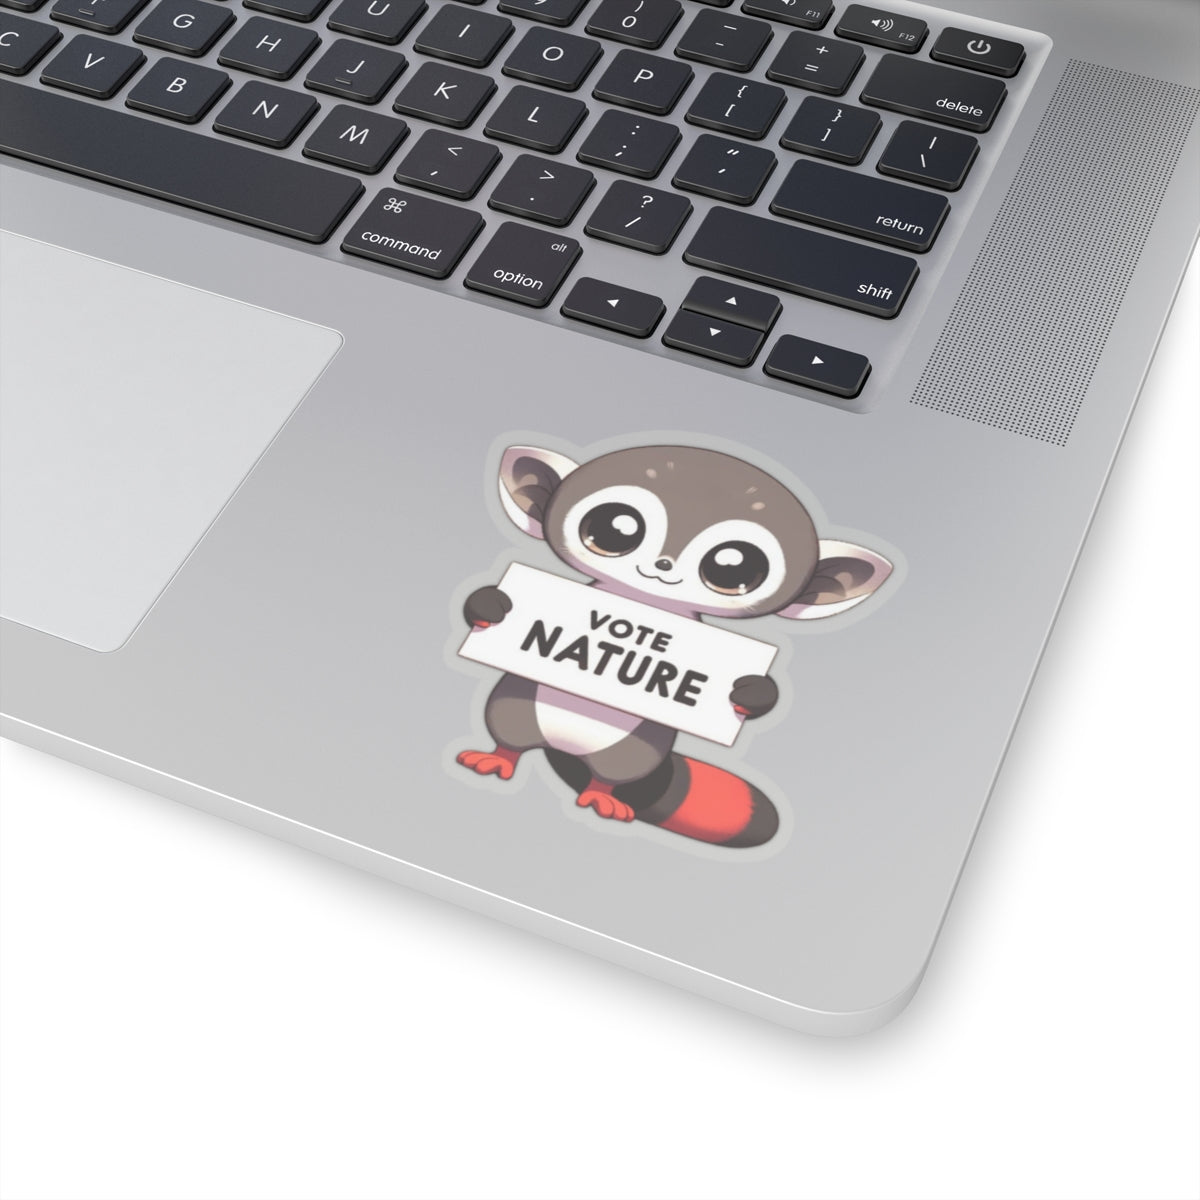 Inspirational Cute Red Shanked Douc Monkey vinyl Sticker: Vote Nature! laptop, kindle, phone, ipad, instrument case, notebook, mood board